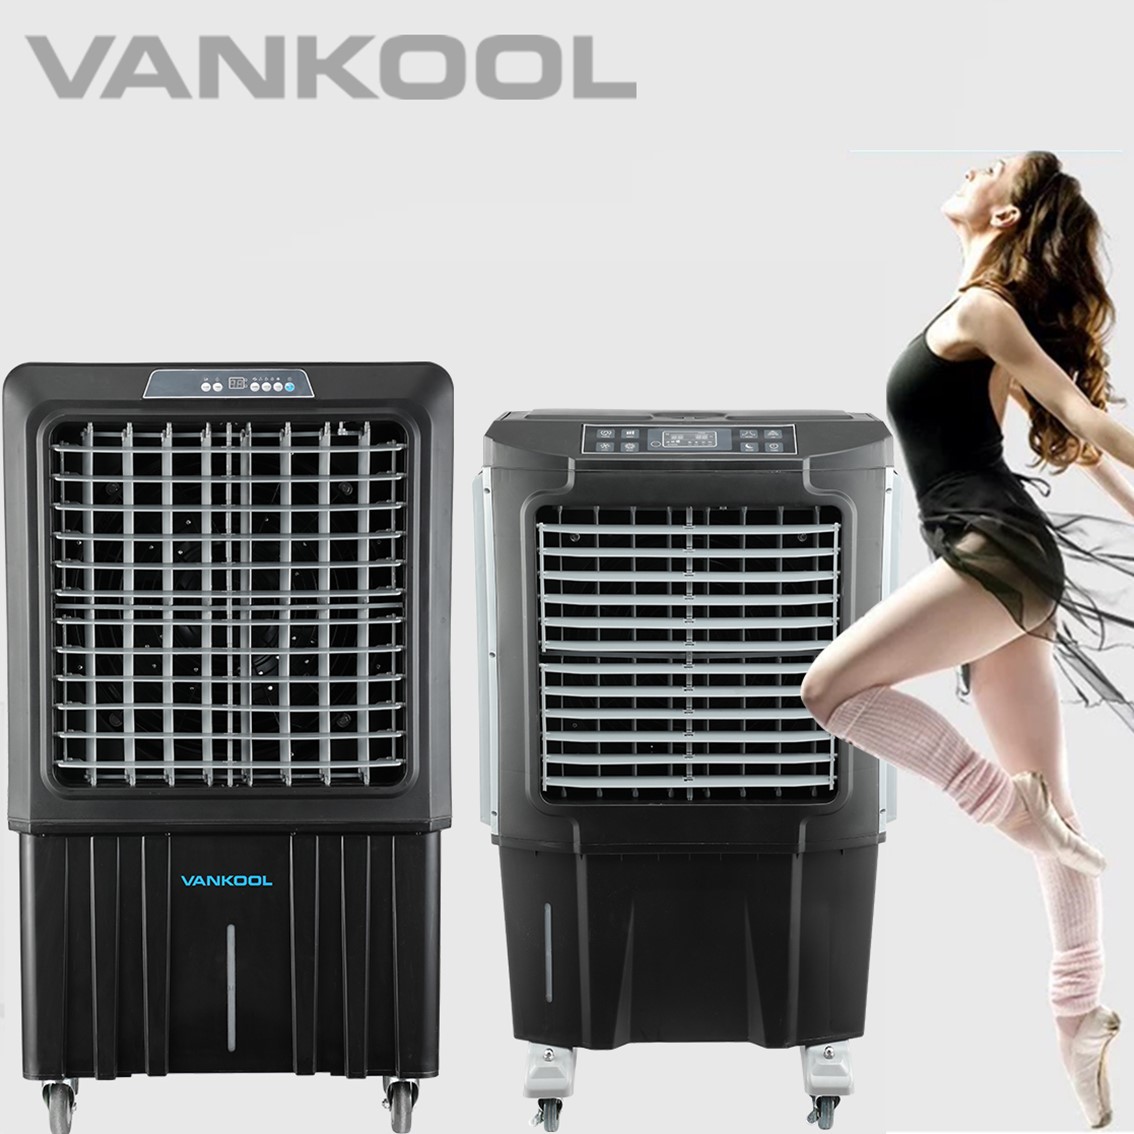 Air Cooler VS AC, Which Is Better